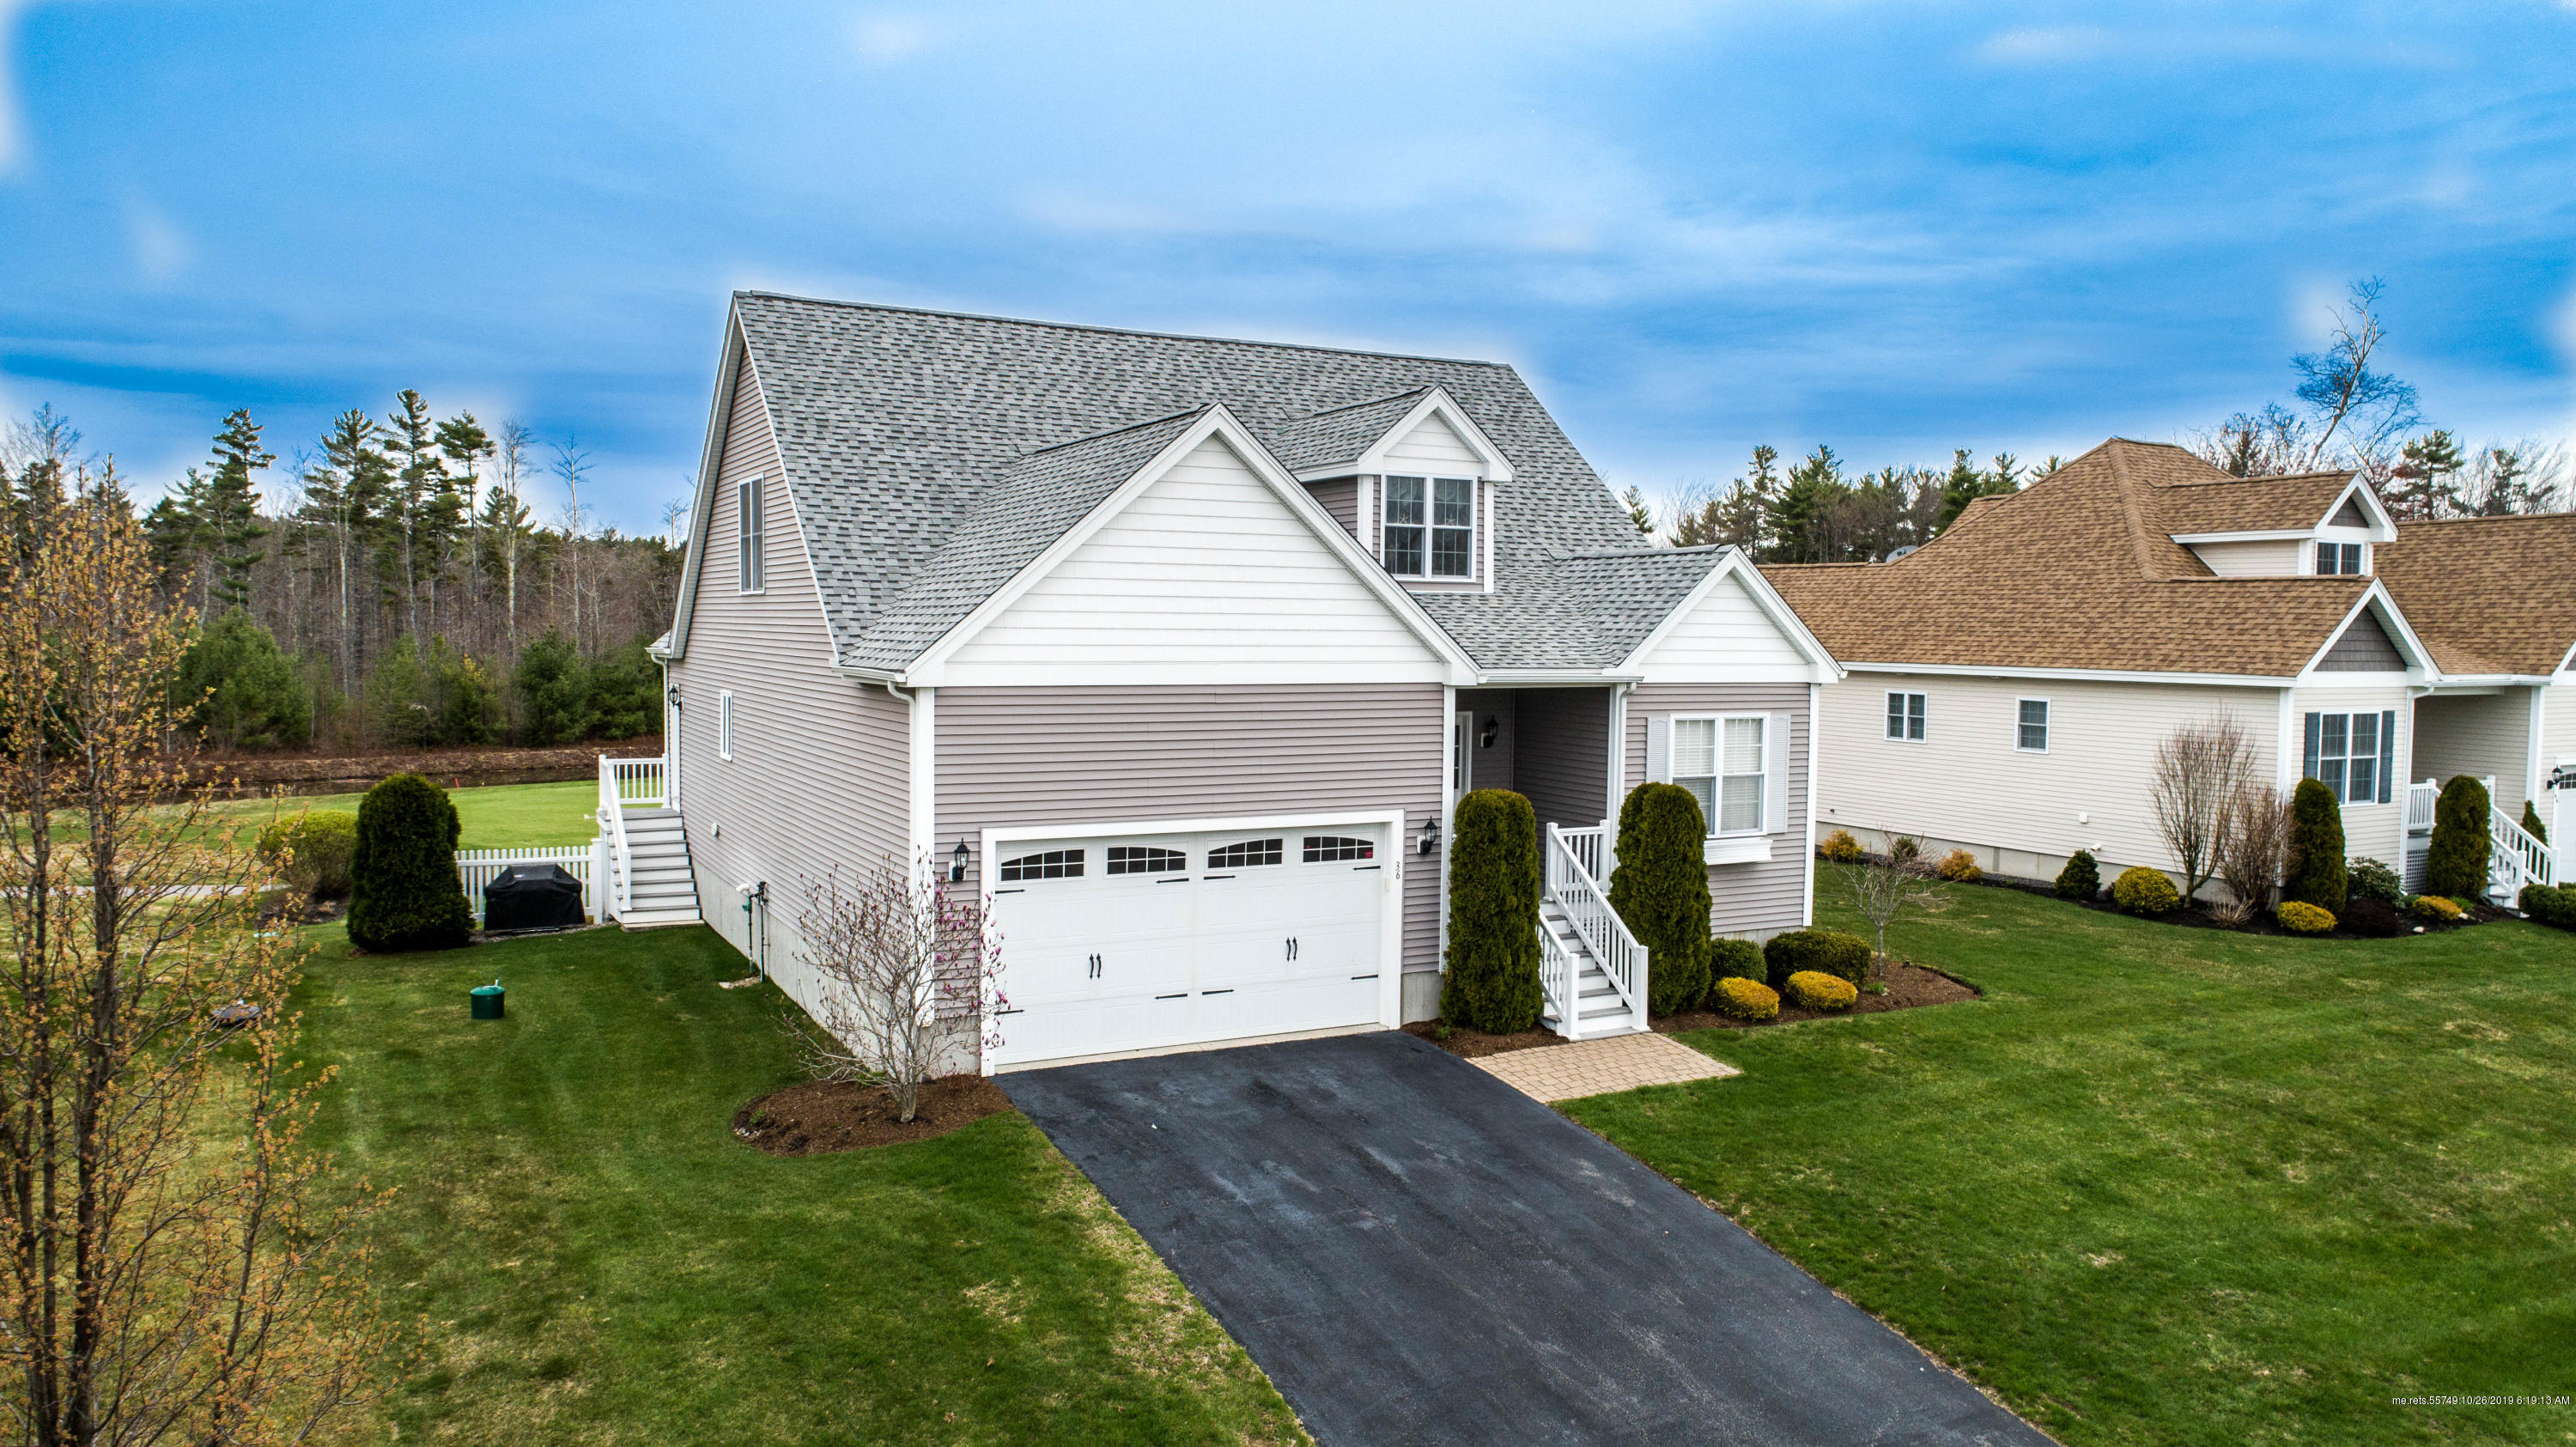 OPEN HOUSE! Saturday March 9, 2019 12-2PM 36 Winners Circle Wells, ME 04090